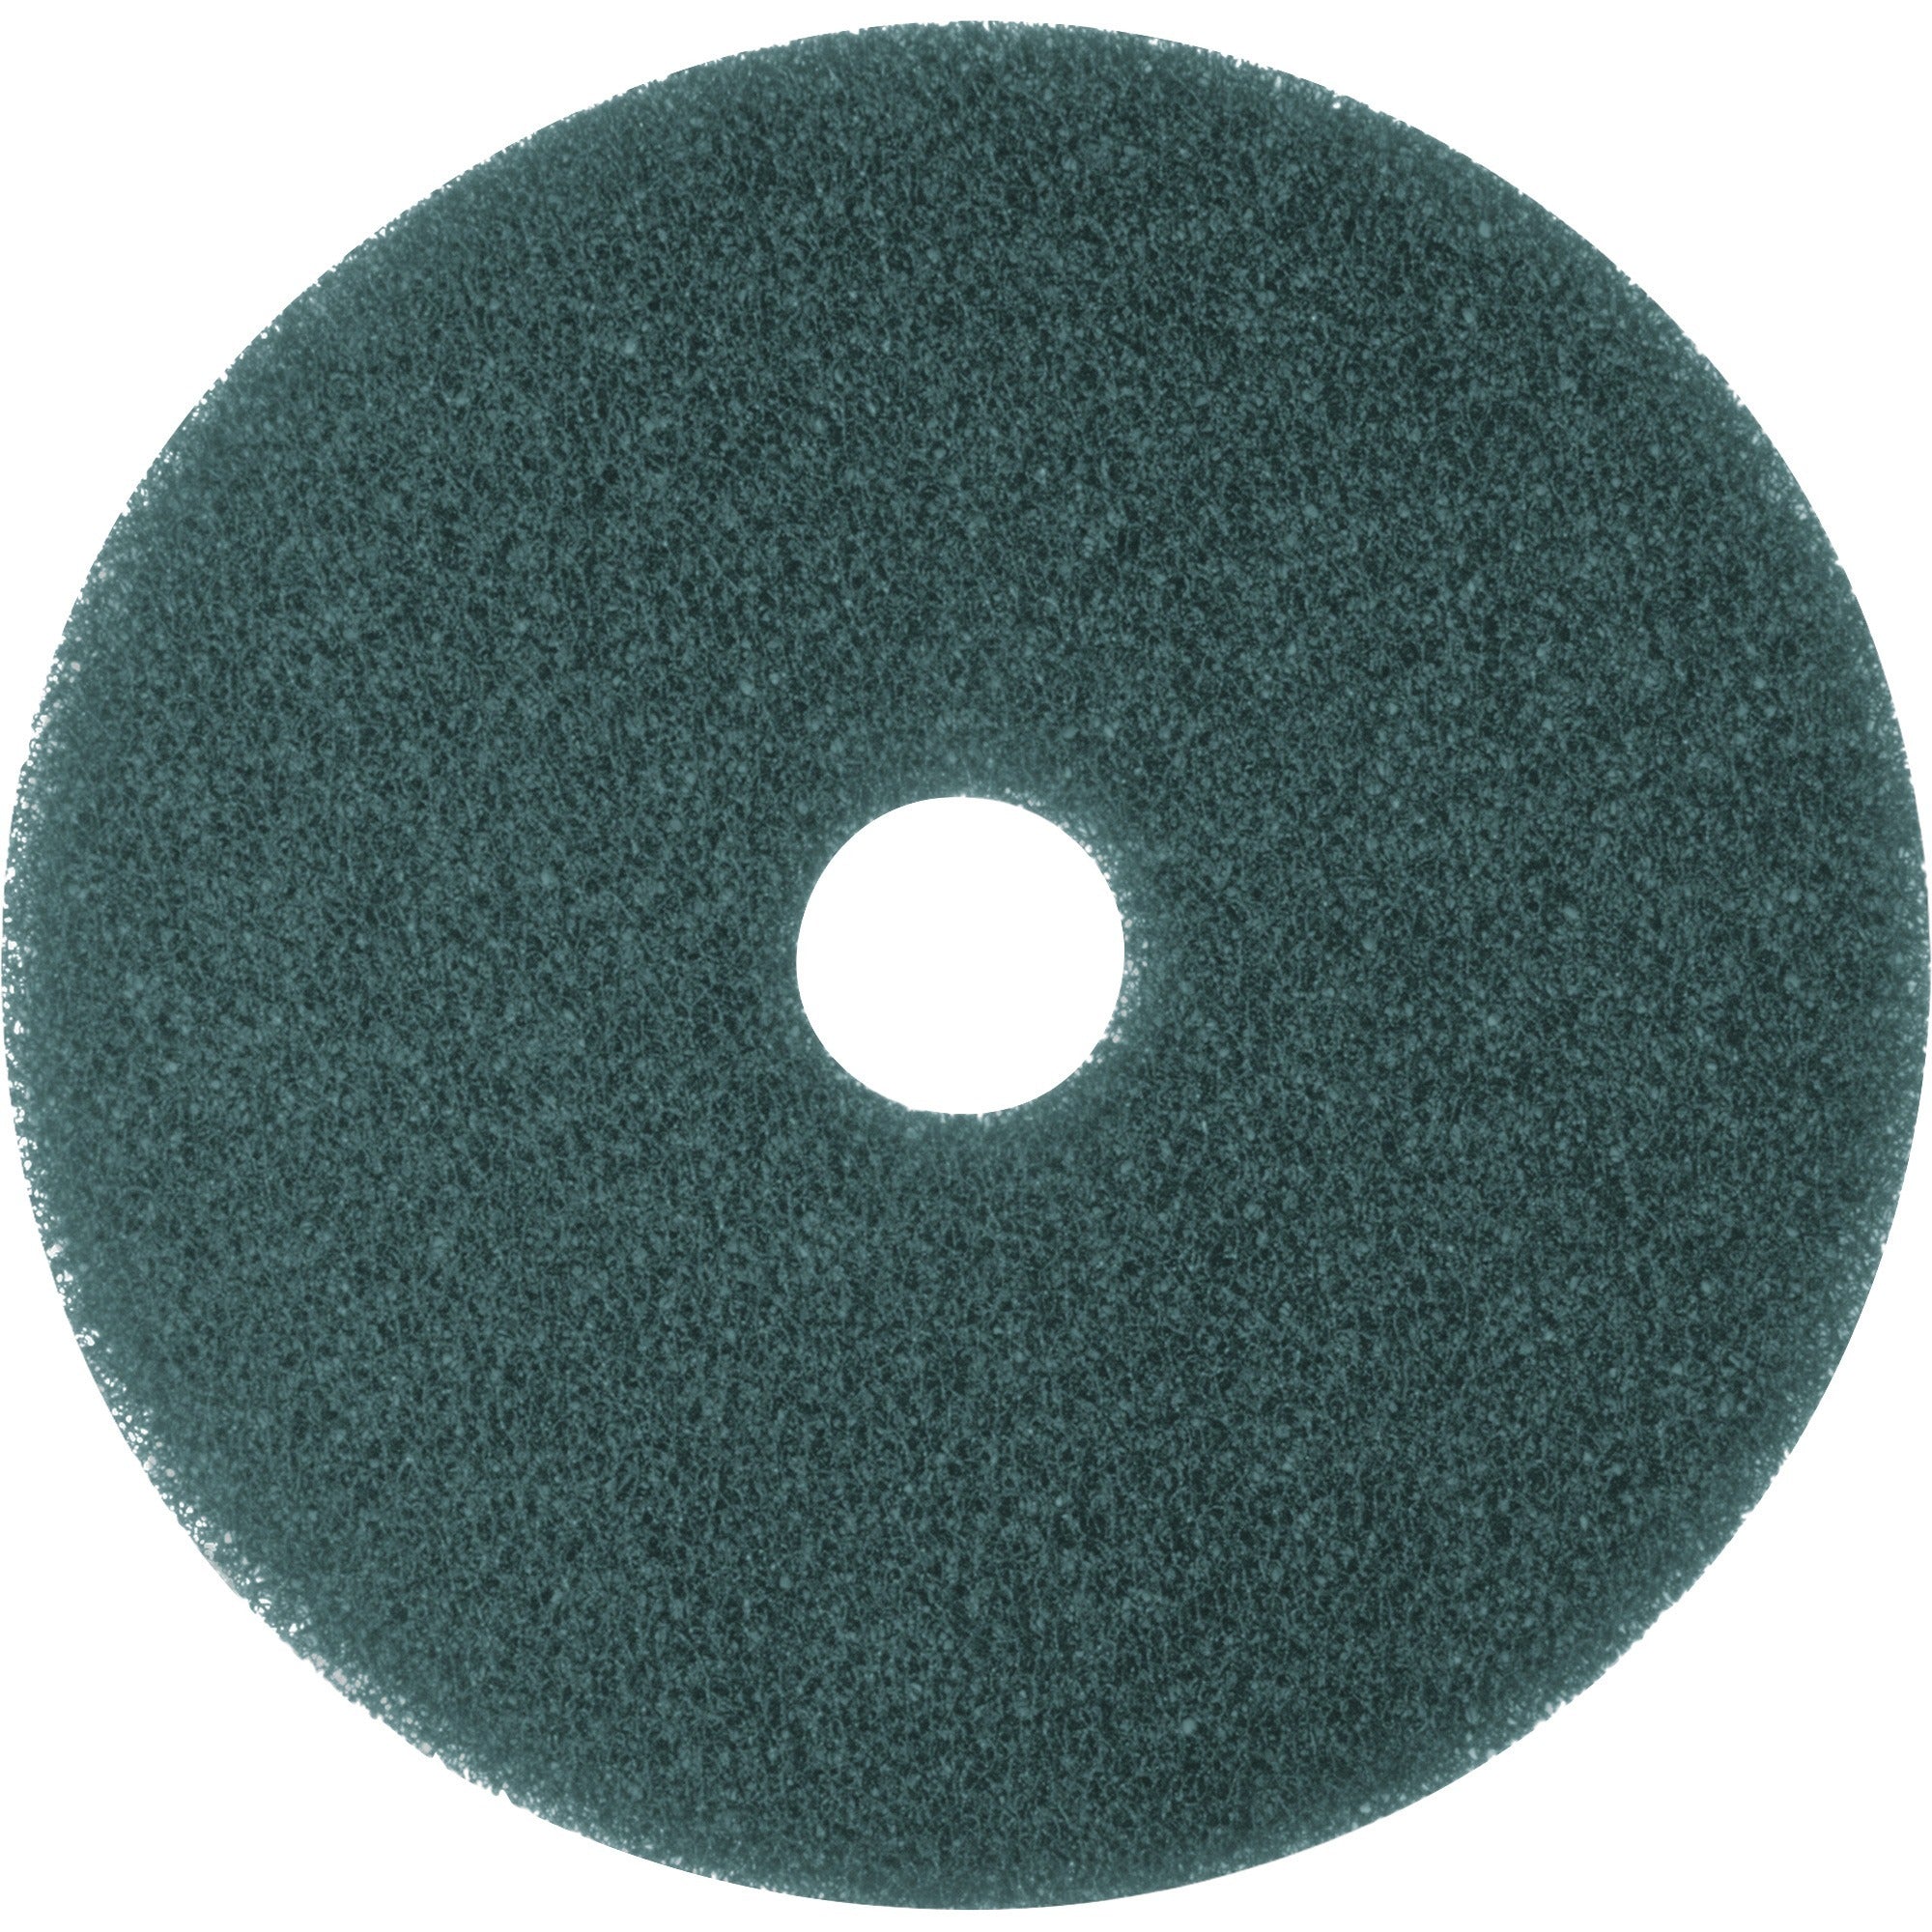 3M Blue Cleaner Pads - 5/Carton - Round x 12" Diameter - Scrubbing, Floor - Hard Floor - 175 rpm to 600 rpm Speed Supported - Textured, Adhesive, Durable, Heavy Duty, Dirt Remover, Scuff Mark Remover, Abrasive - Nylon, Polyester Fiber - Blue - 